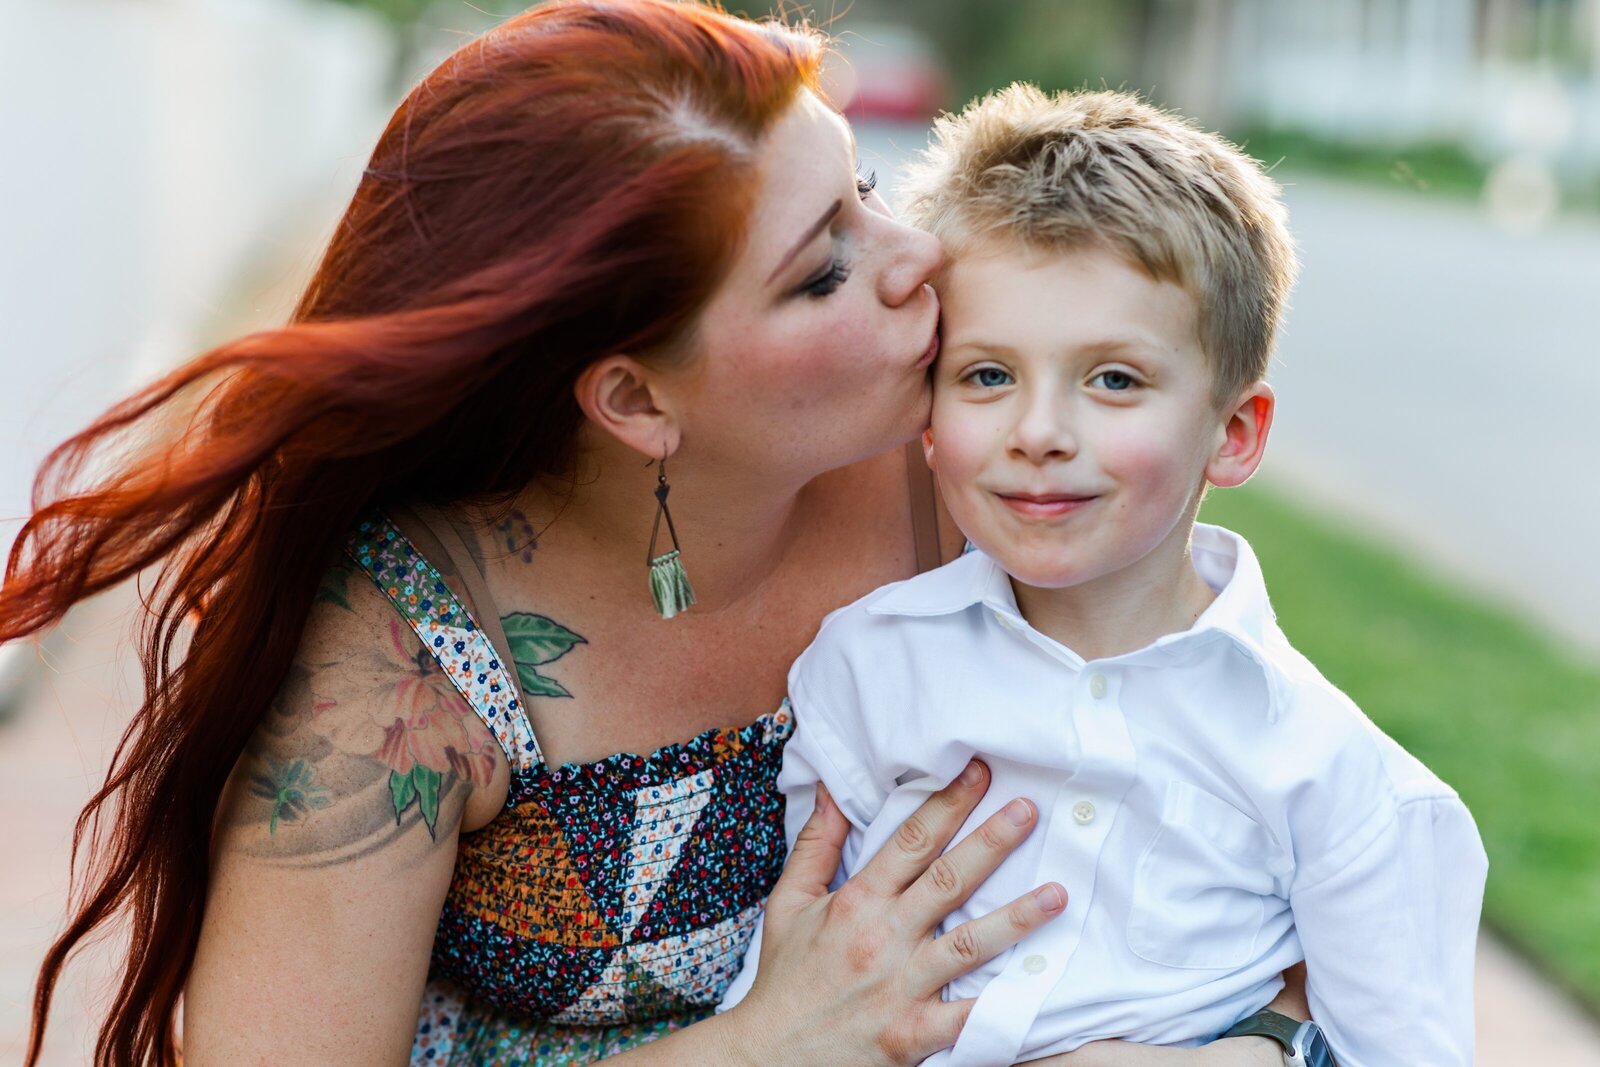 Downtown Pensacola Family Photography session with family of 4. Mom kissing son on the cheek.